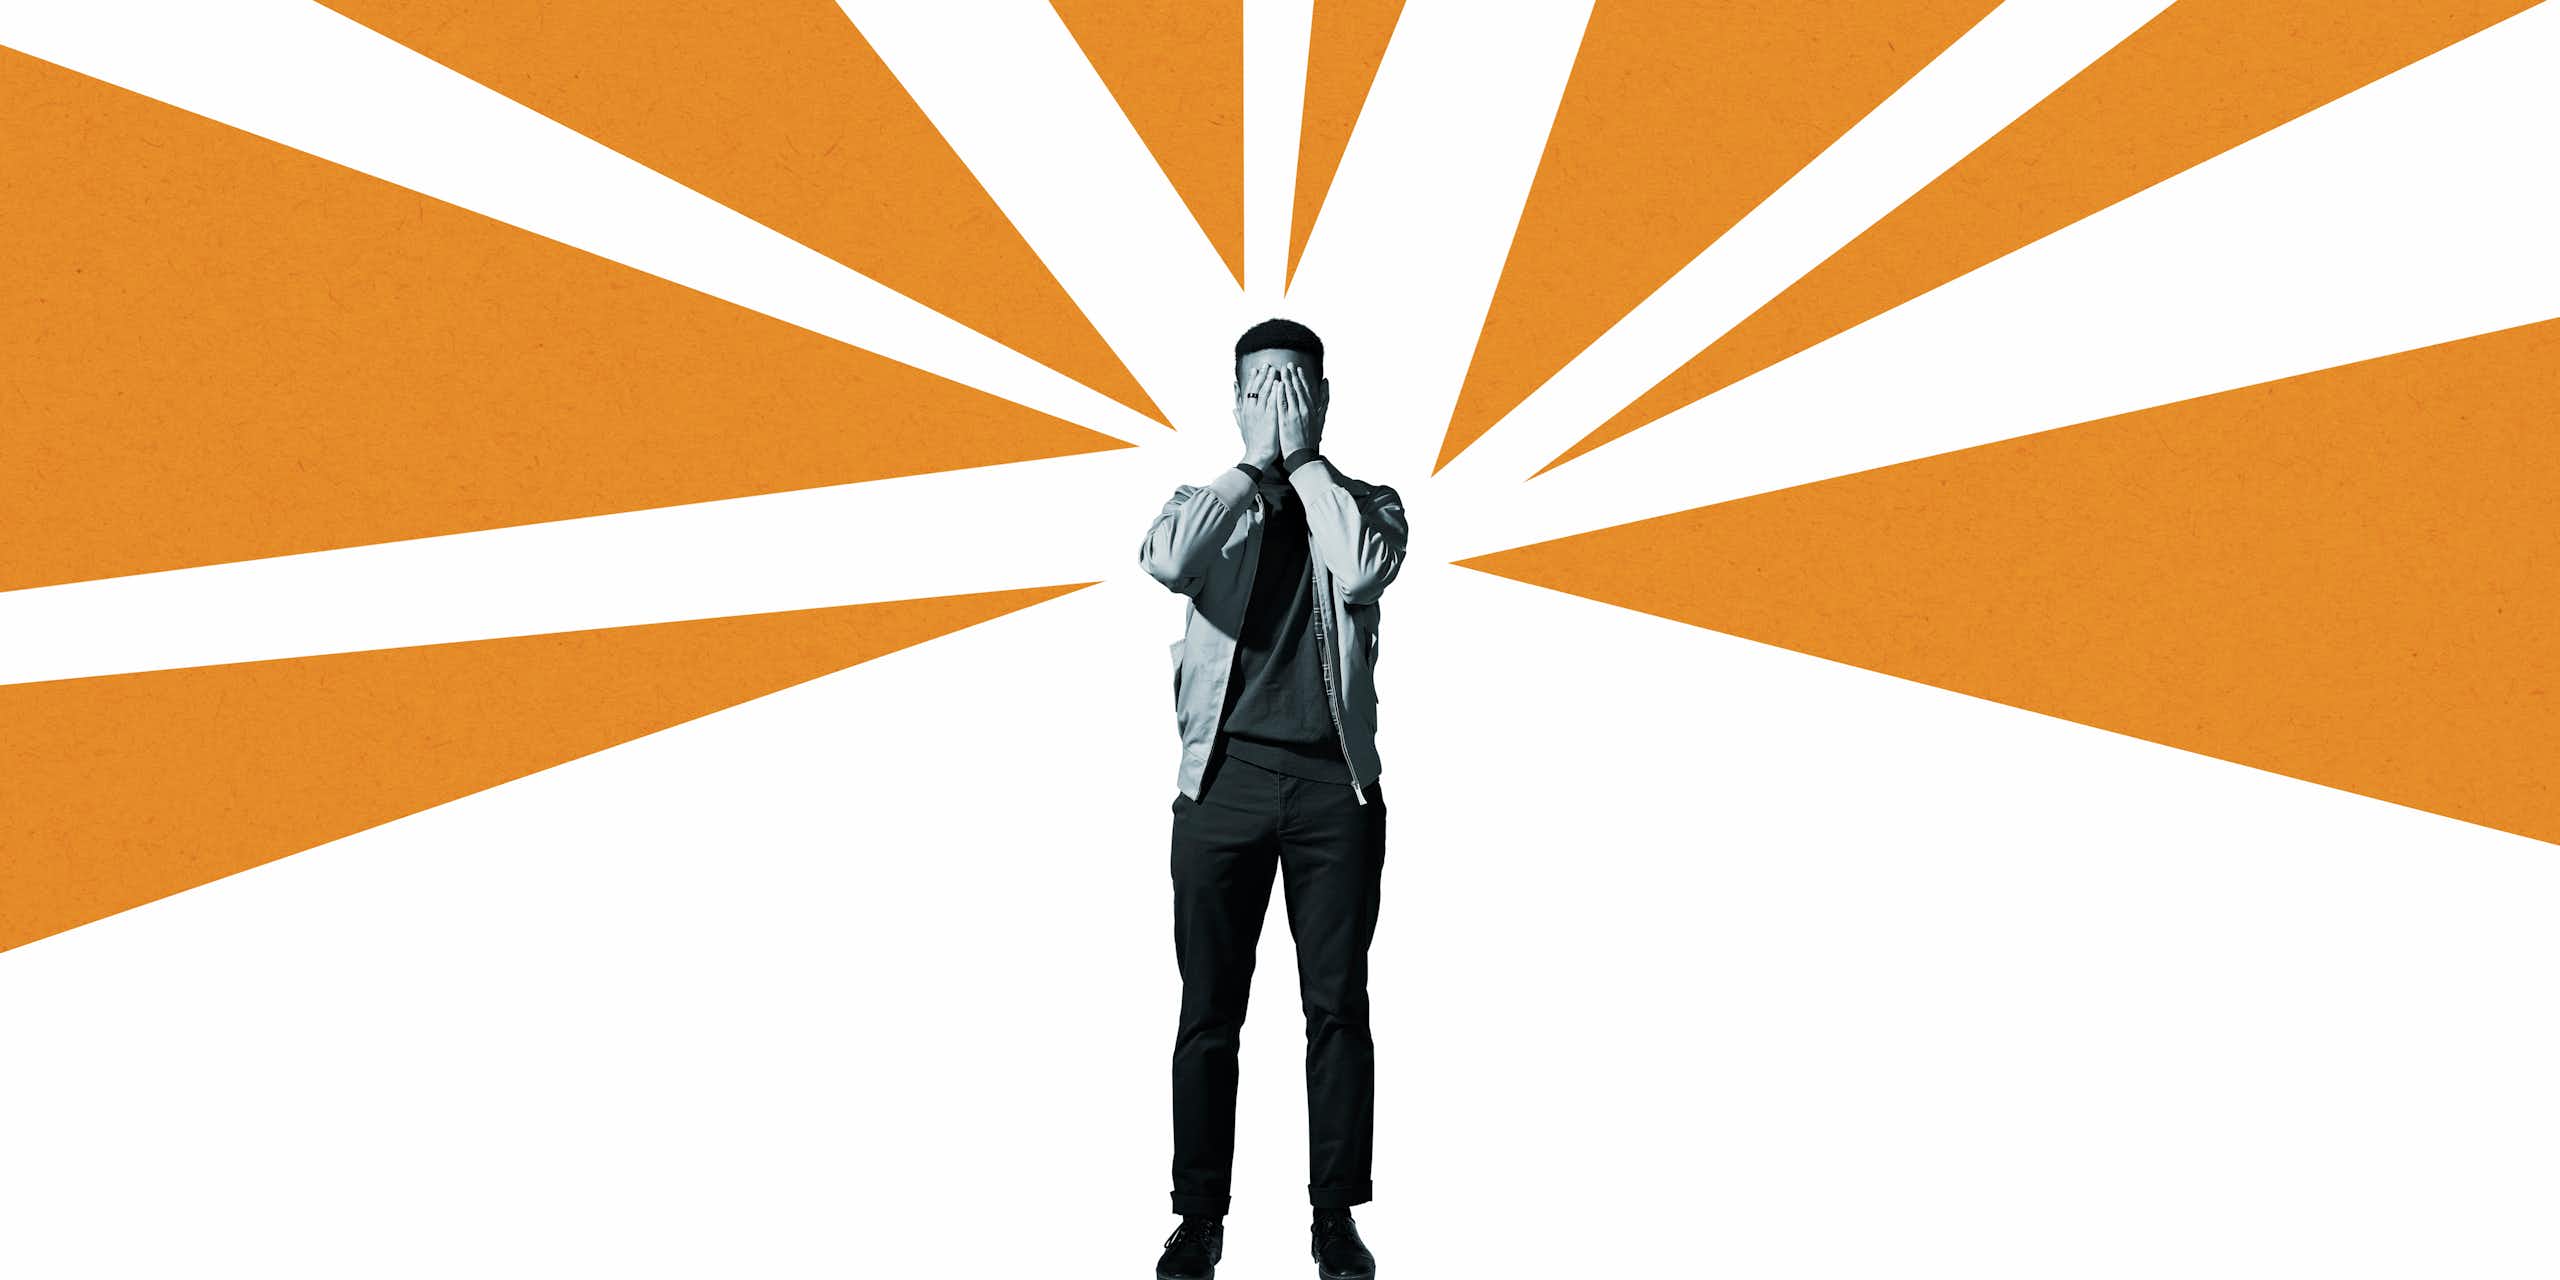 A stressed man, covering his face with his hands, stands amid illustrated orange rays and a white background.